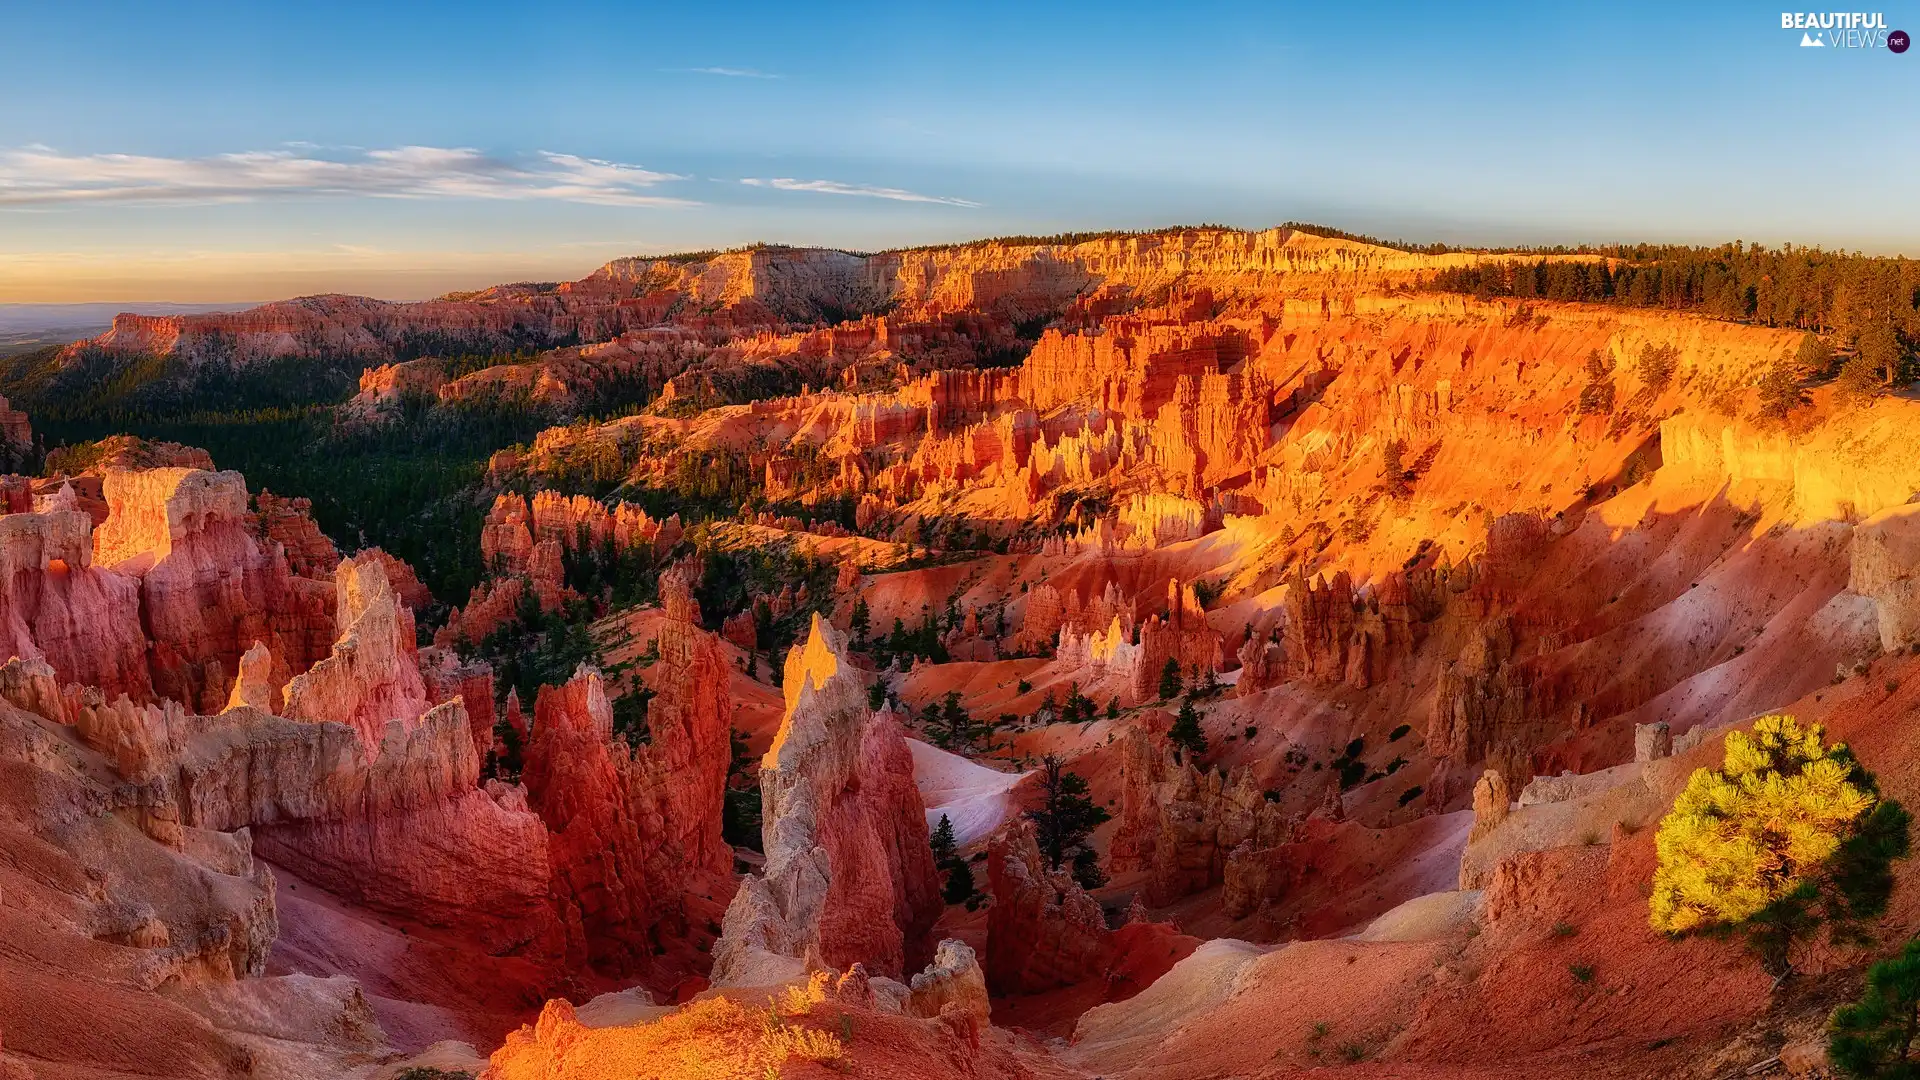 Utah State, The United States, rocks, Bryce Canyon National Park, canyon